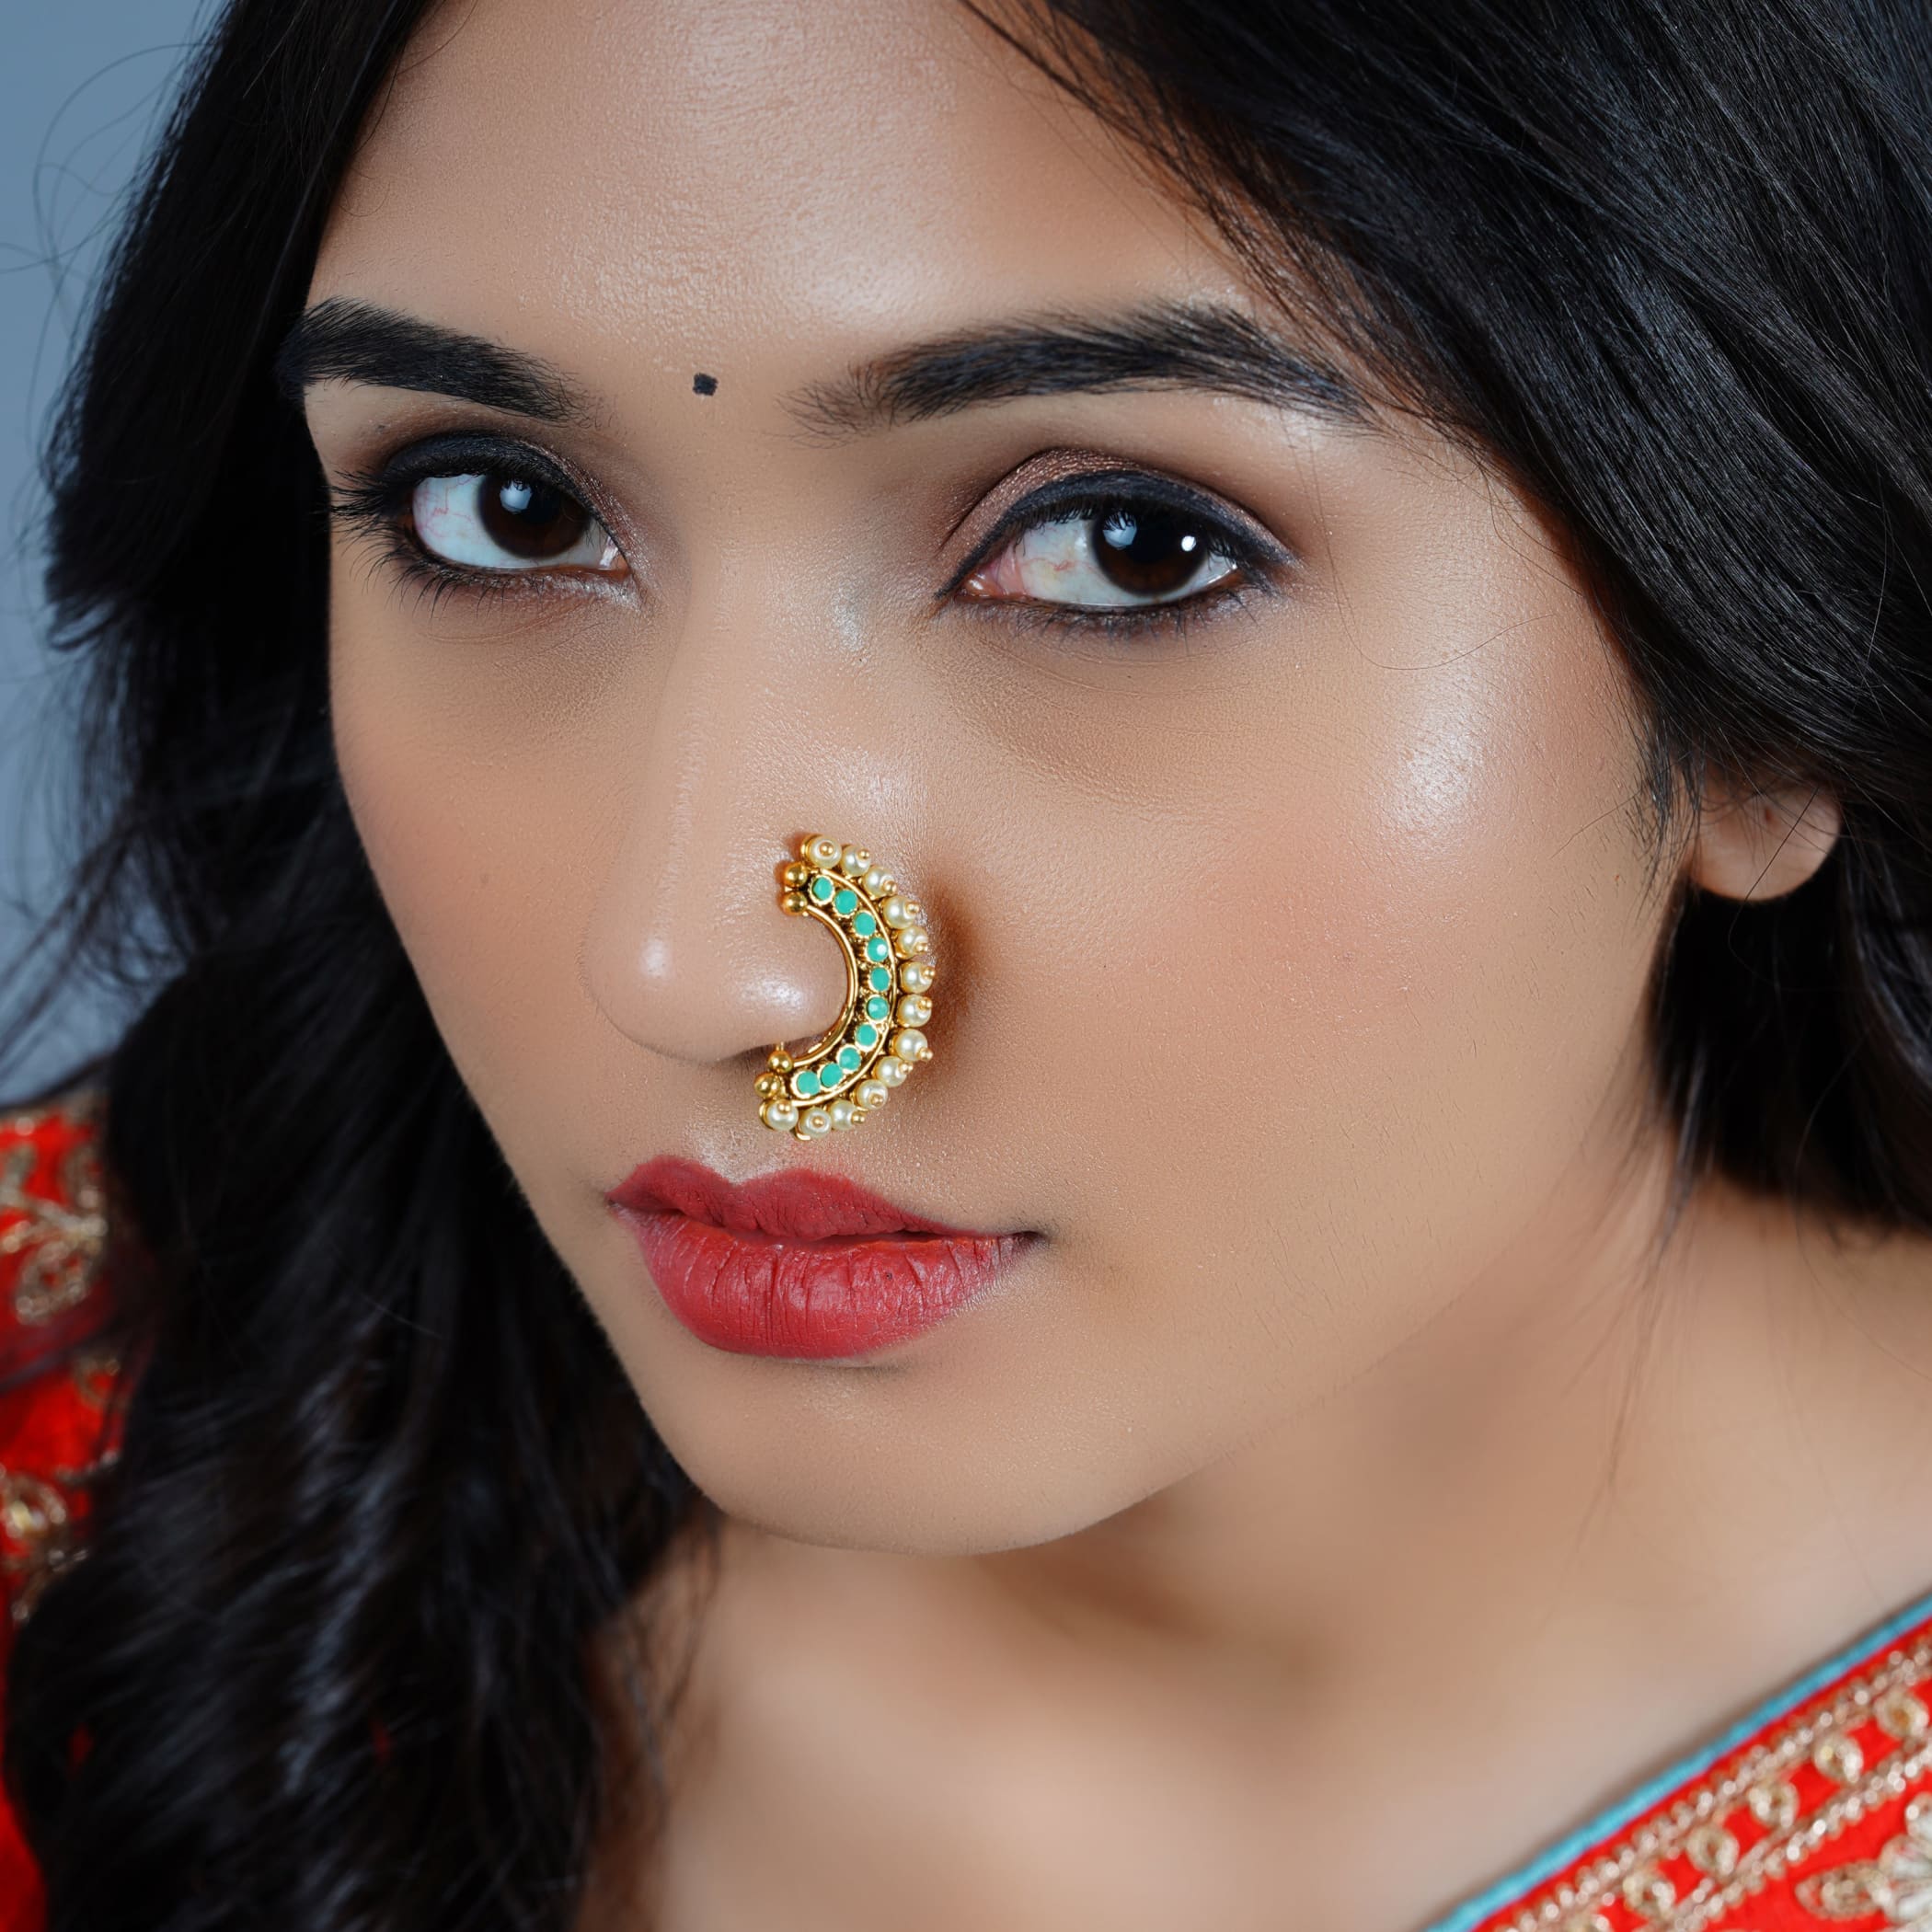 Buy Mehr Gemstone 3 MARATHI Nose ring COMBO_6 Silver oxidized Jewellery  Marathi piercing NOSE pin for Girls and women for Party, work wear,  festivals at Amazon.in